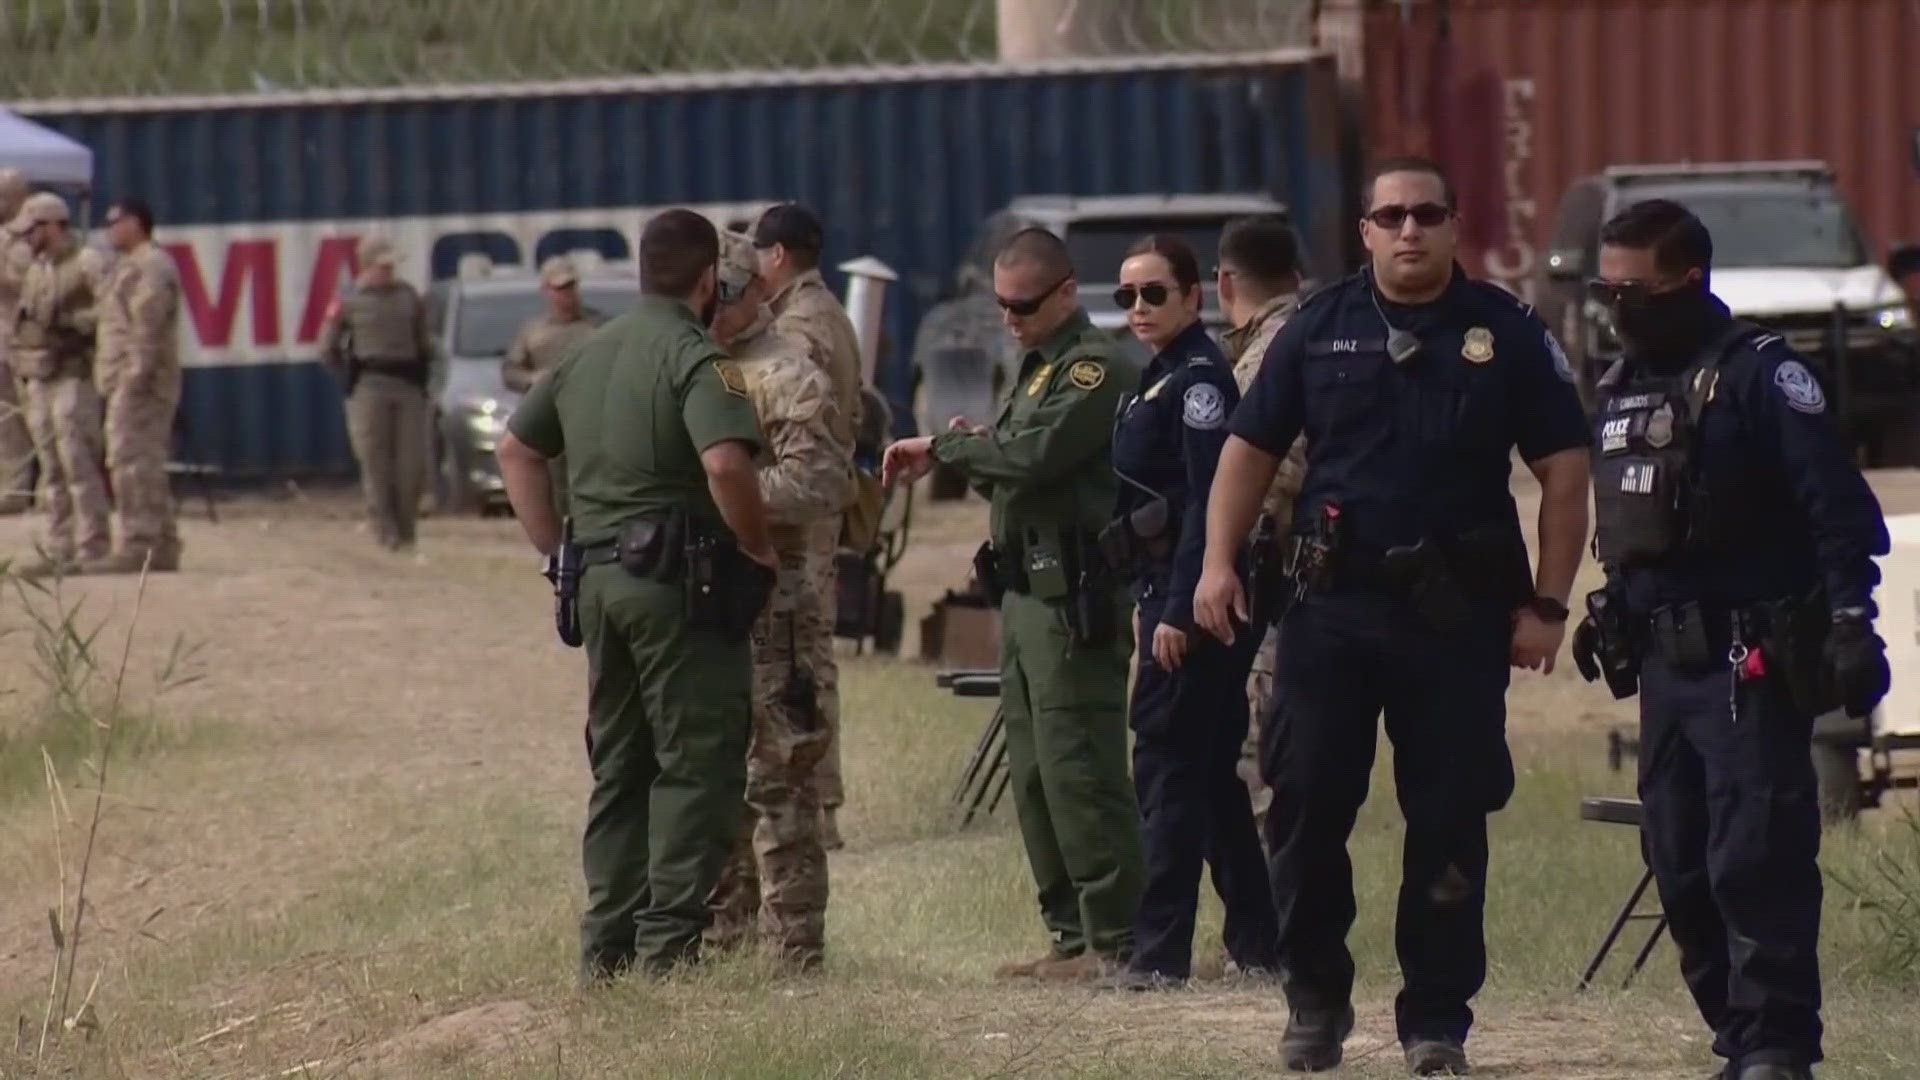 Dozens of Republican leaders headed to the border Wednesday, as the immigration crisis surges.